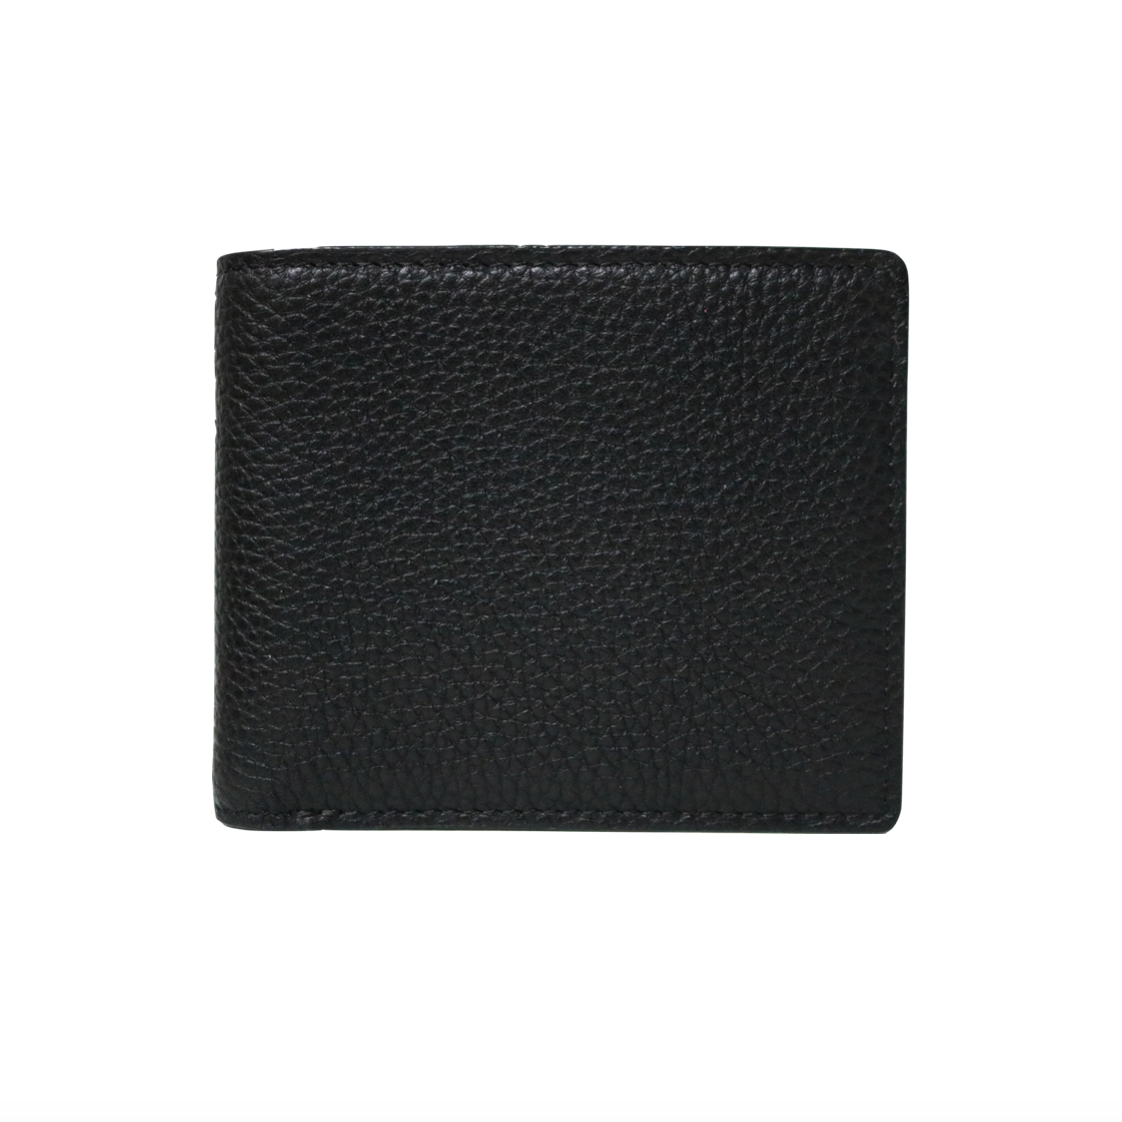 Image of Black Pebbled Leather Classic Bifold Wallet